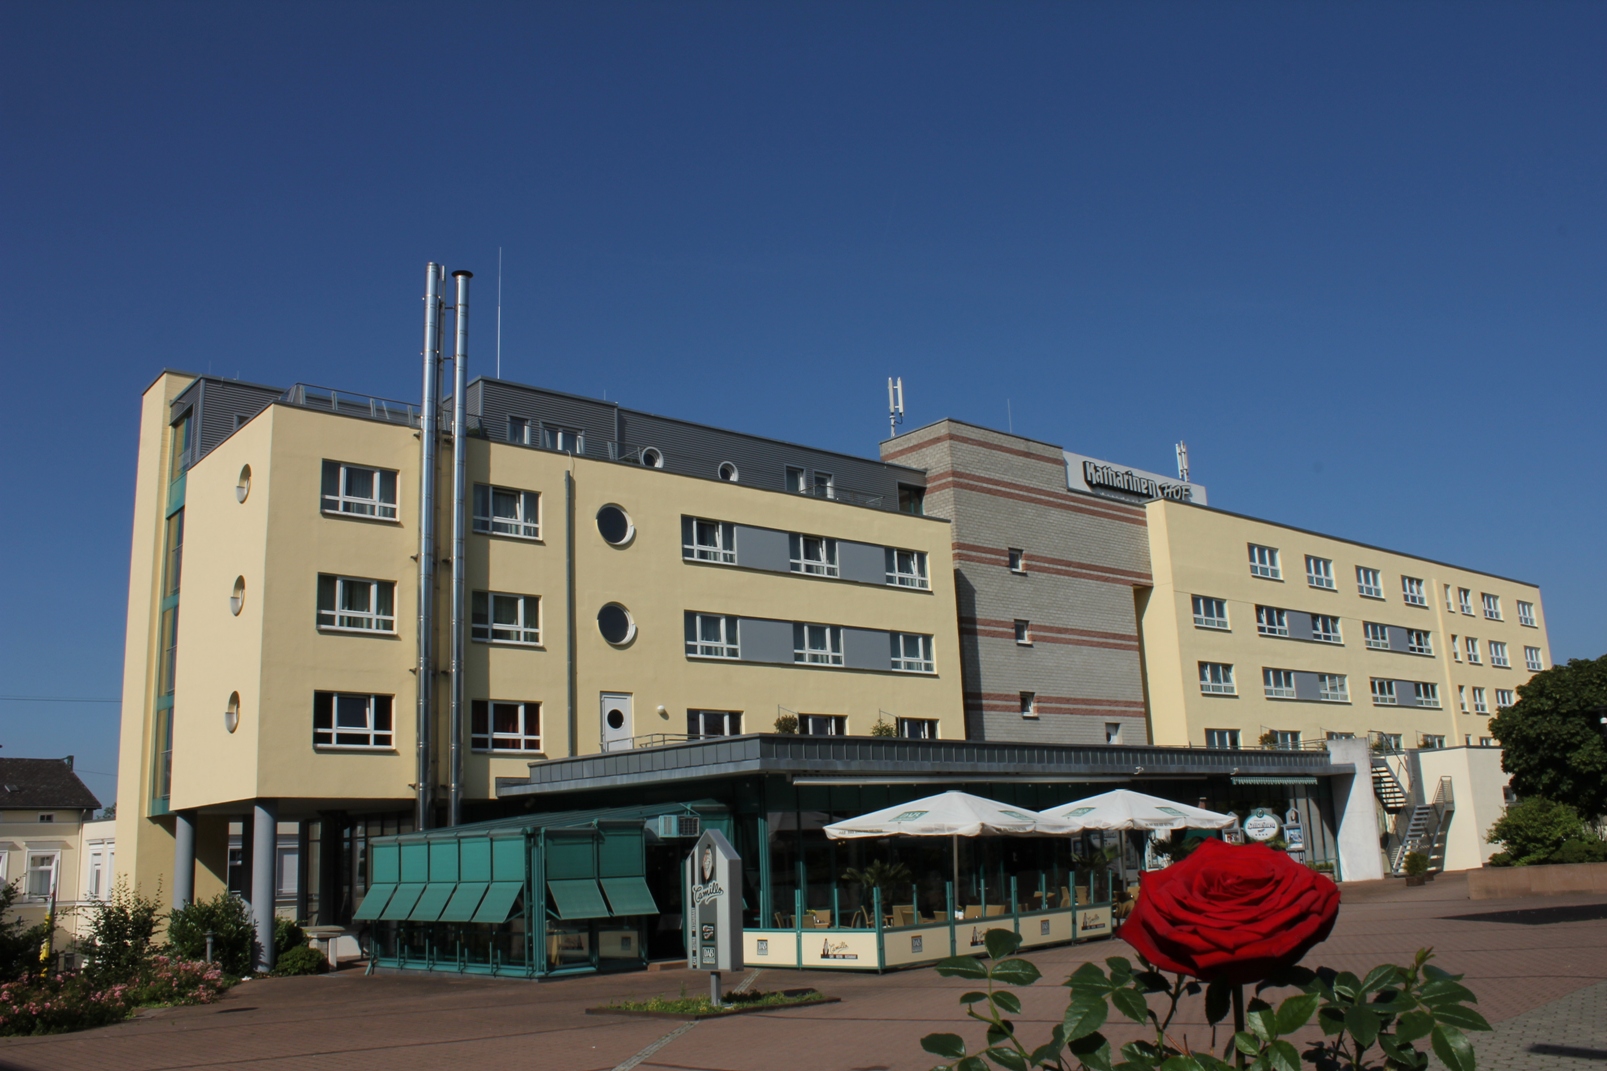 Ringhotel Katharinen Hof <br/>129.00 ew <br/> <a href='http://vakantieoplossing.nl/outpage/?id=ce4799fbb76a1efff4400a66069ba160' target='_blank'>View Details</a>